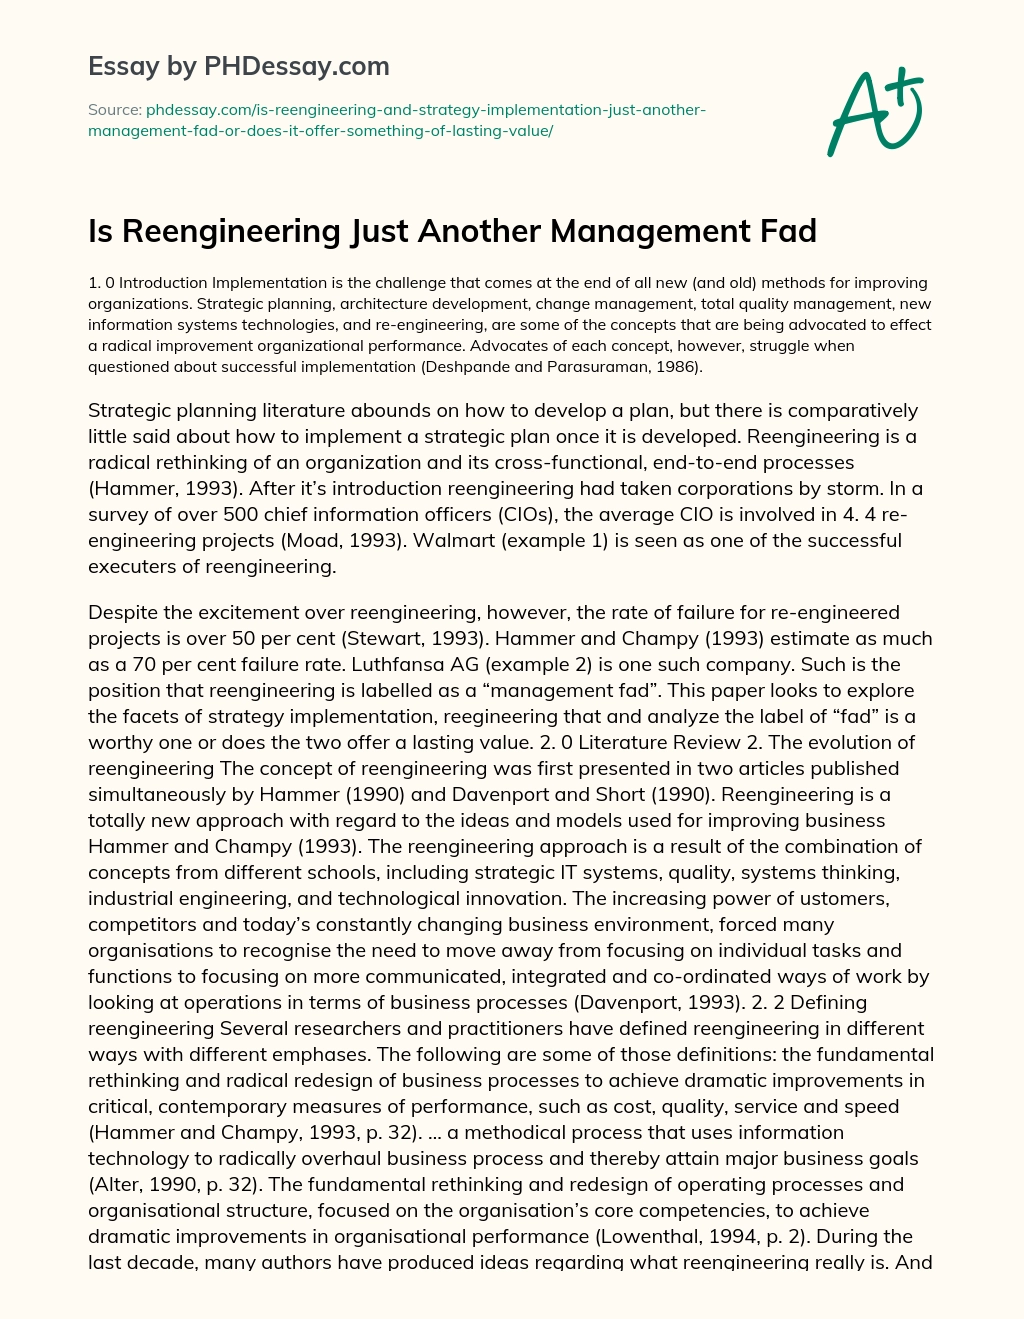 Is Reengineering Just Another Management Fad essay